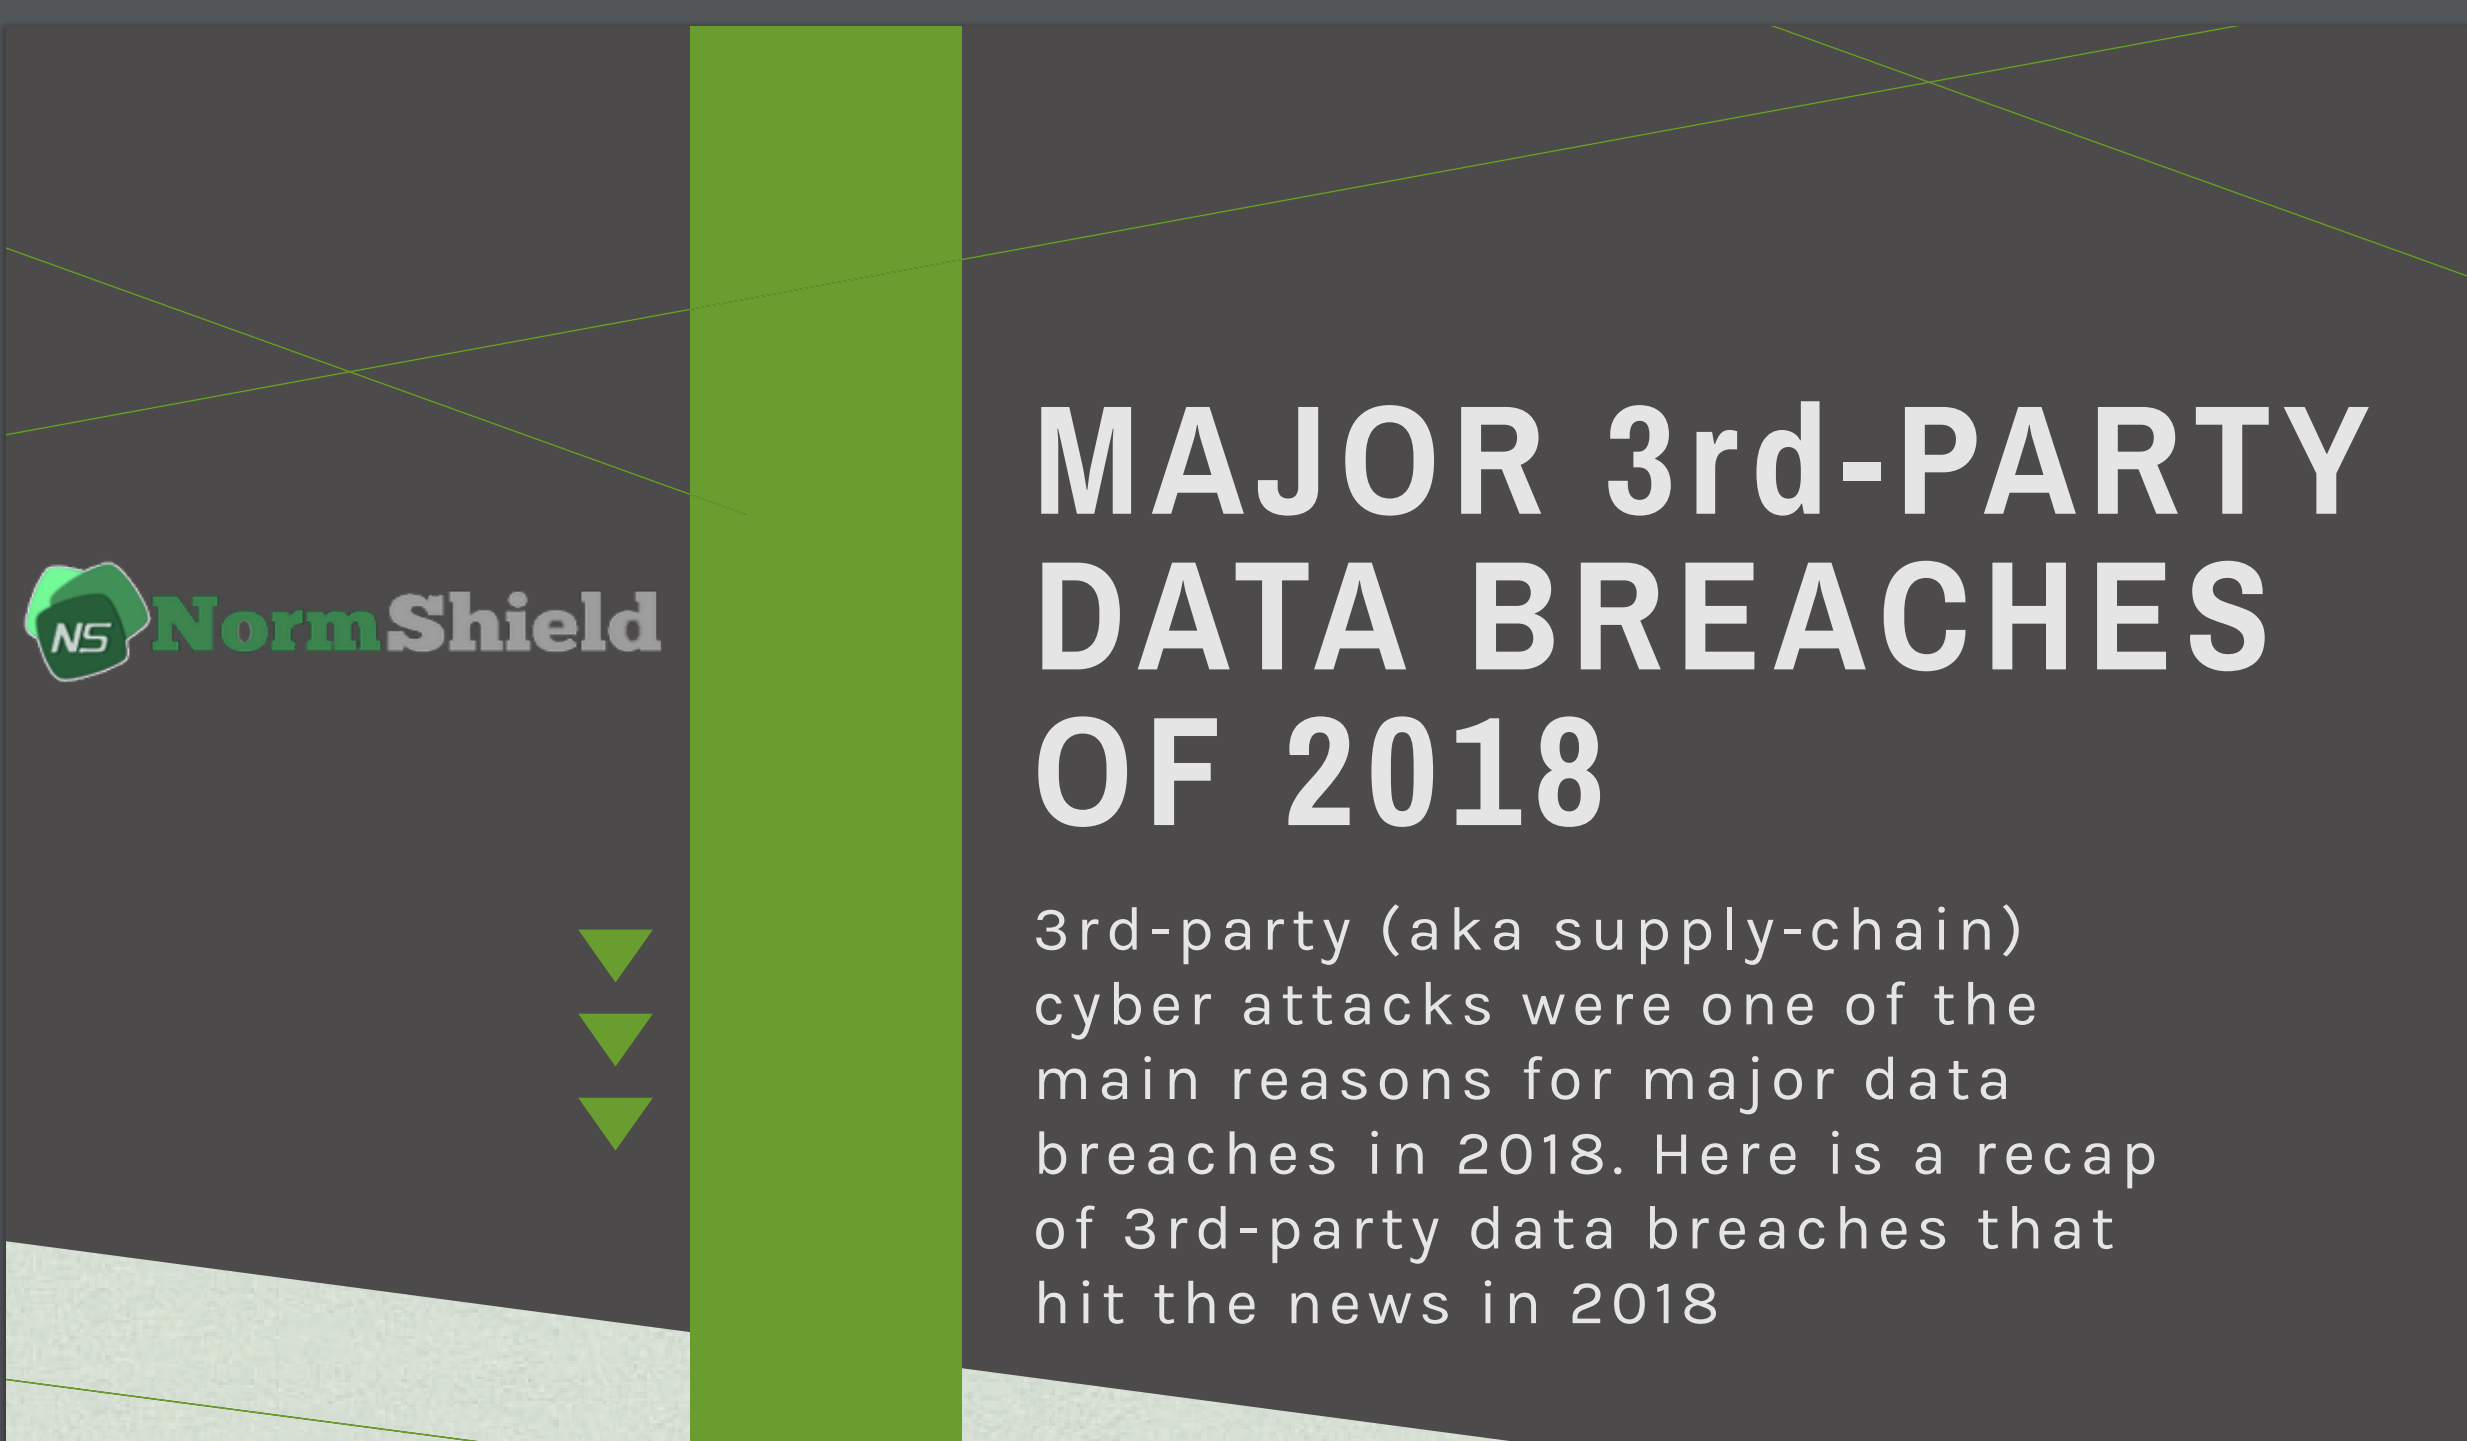 Major 3rd-Party Data Breaches Of 2018